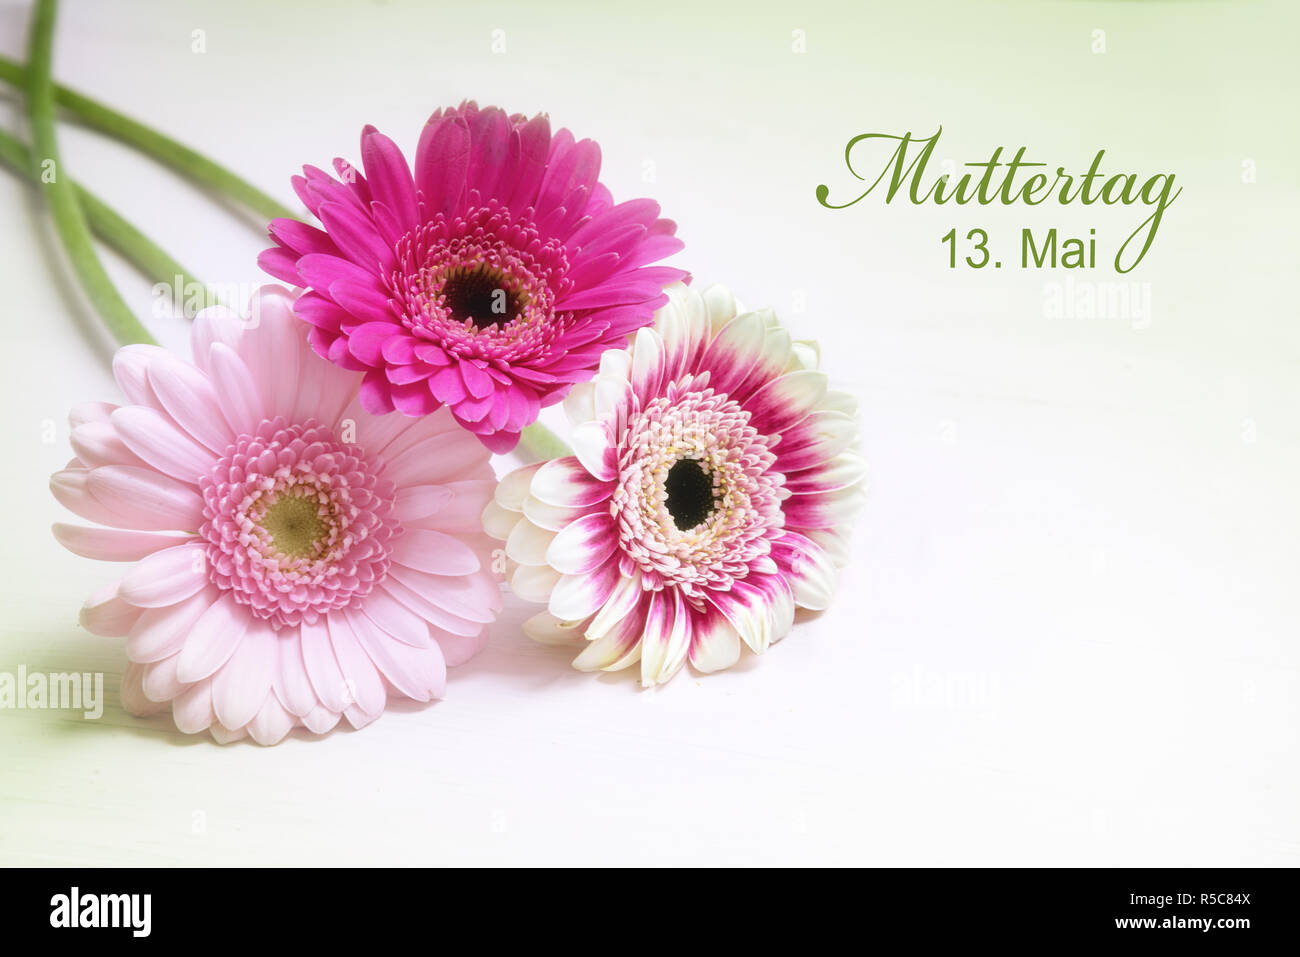 three gerbera flowers in pink and white on a bright background with copy space, greeting card with german text  Muttertag 13. Mai, meaning Mother's Da Stock Photo